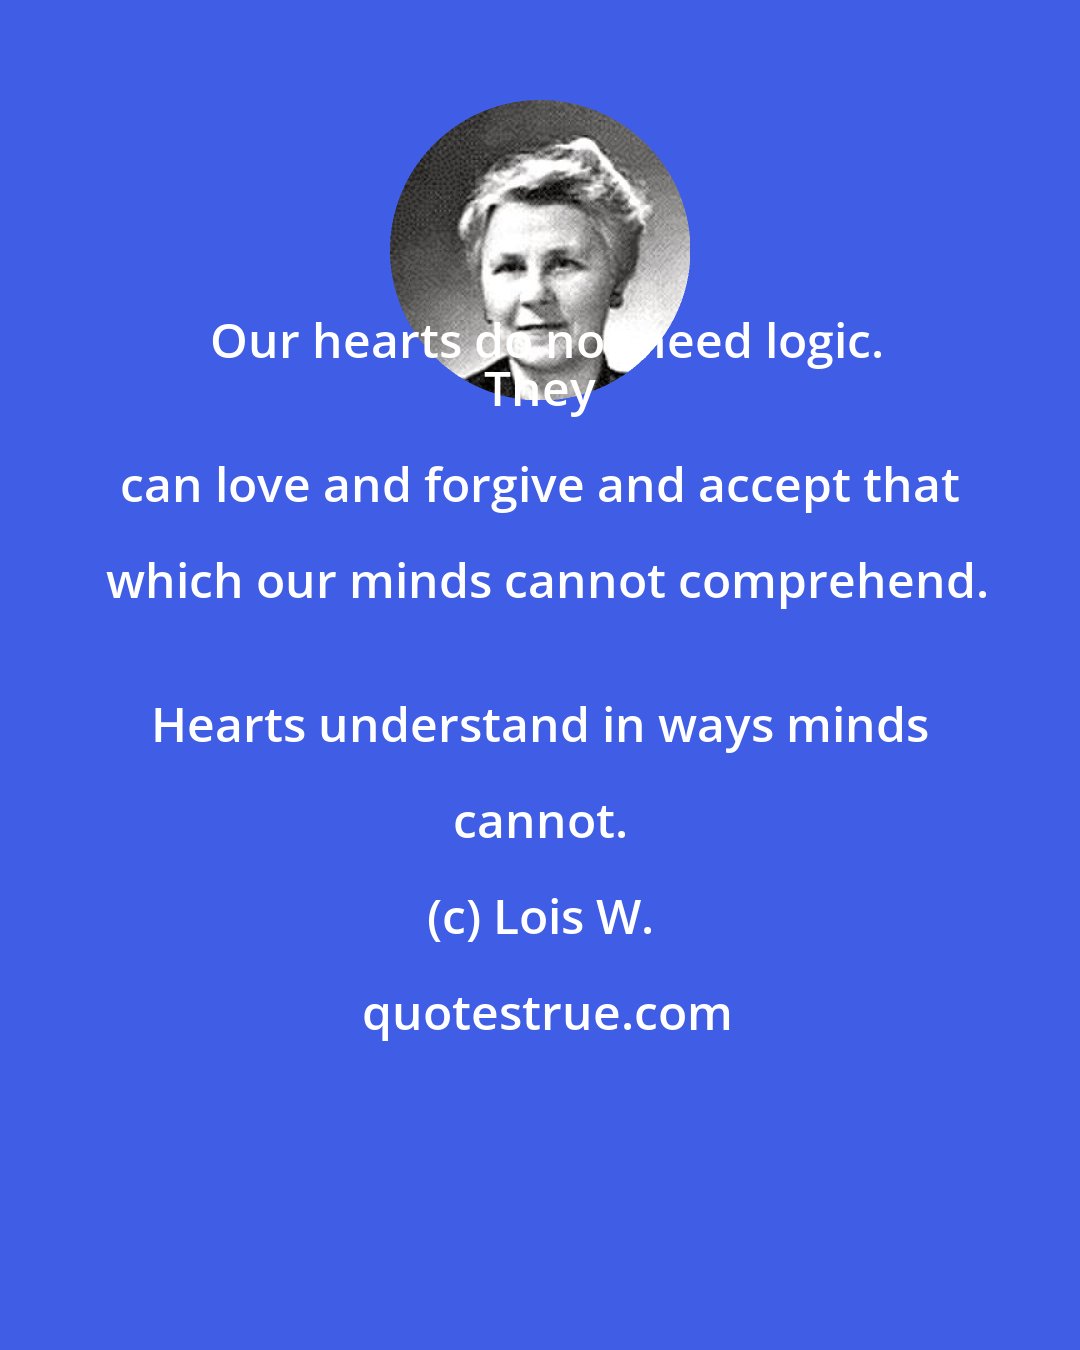 Lois W.: Our hearts do not need logic.
 They can love and forgive and accept that which our minds cannot comprehend.
 Hearts understand in ways minds cannot.